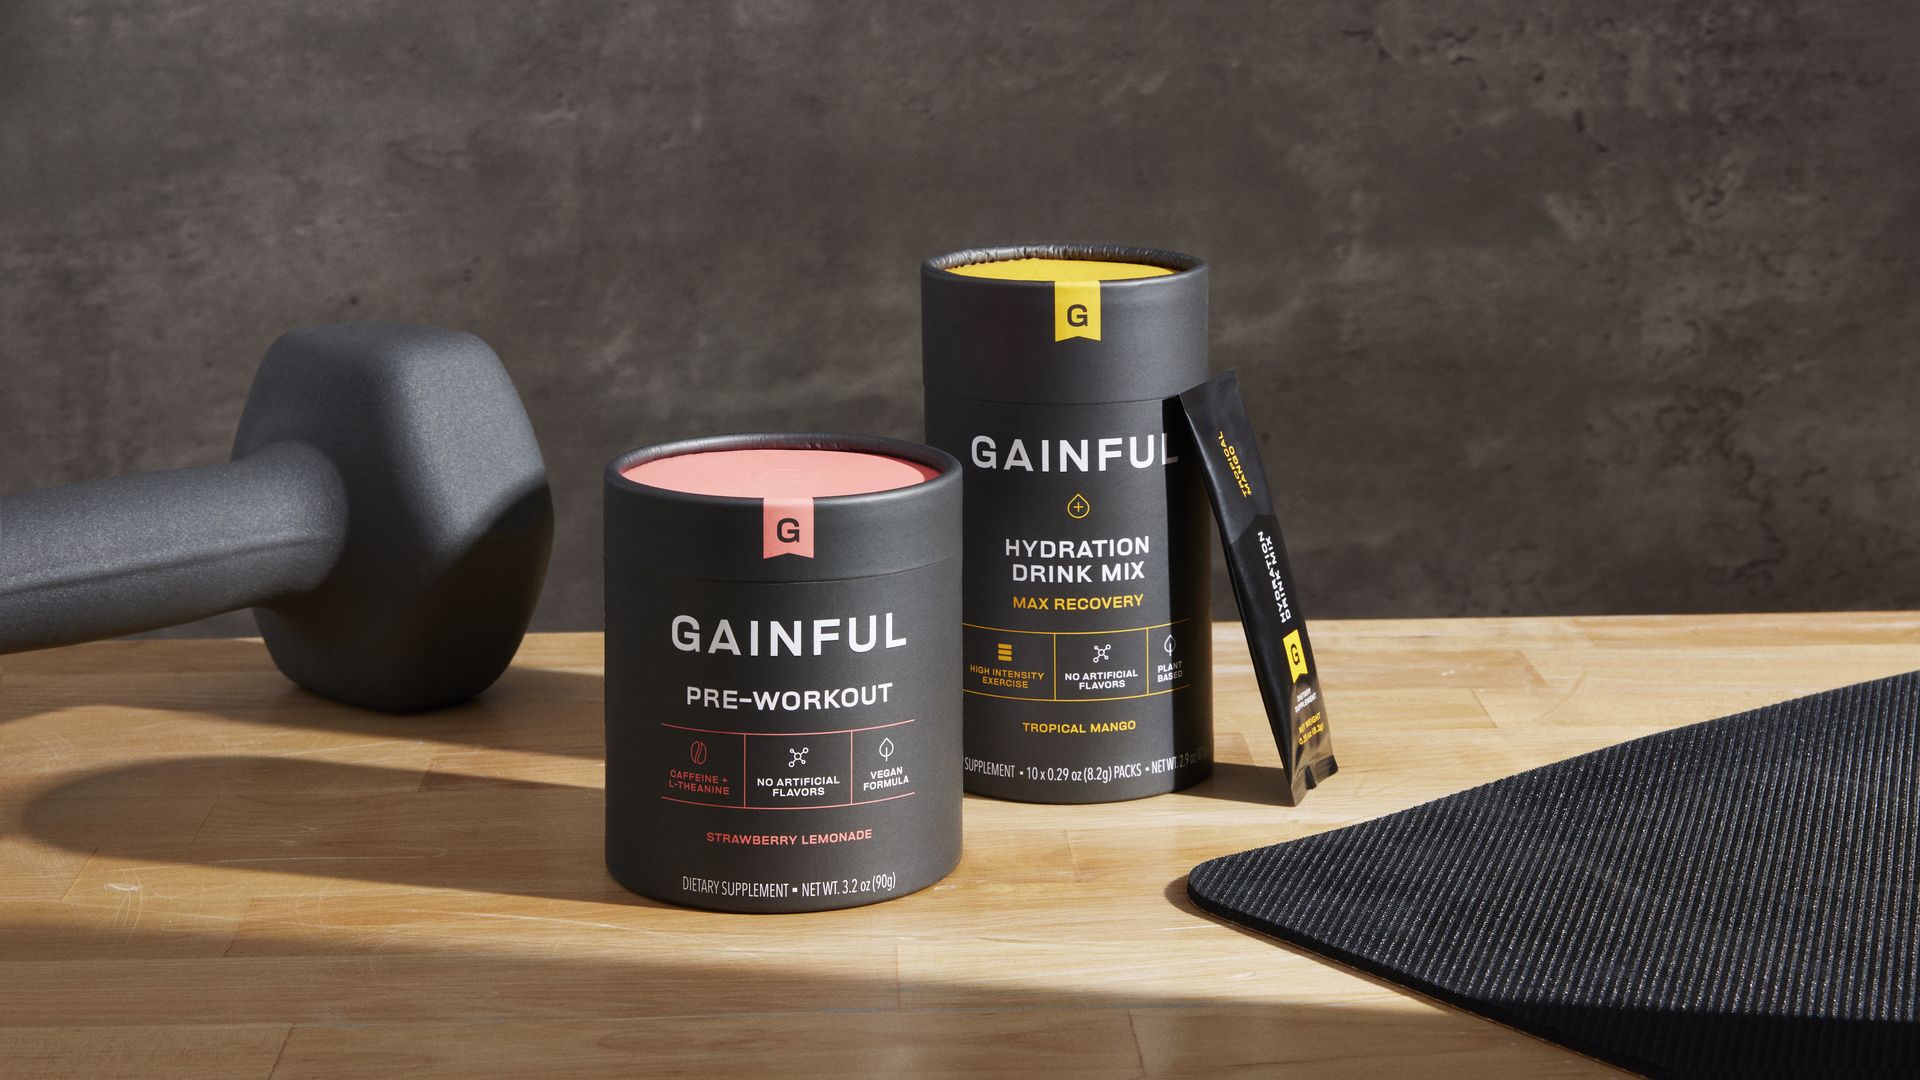 Gainful's pre-workout and hydration supplement products.